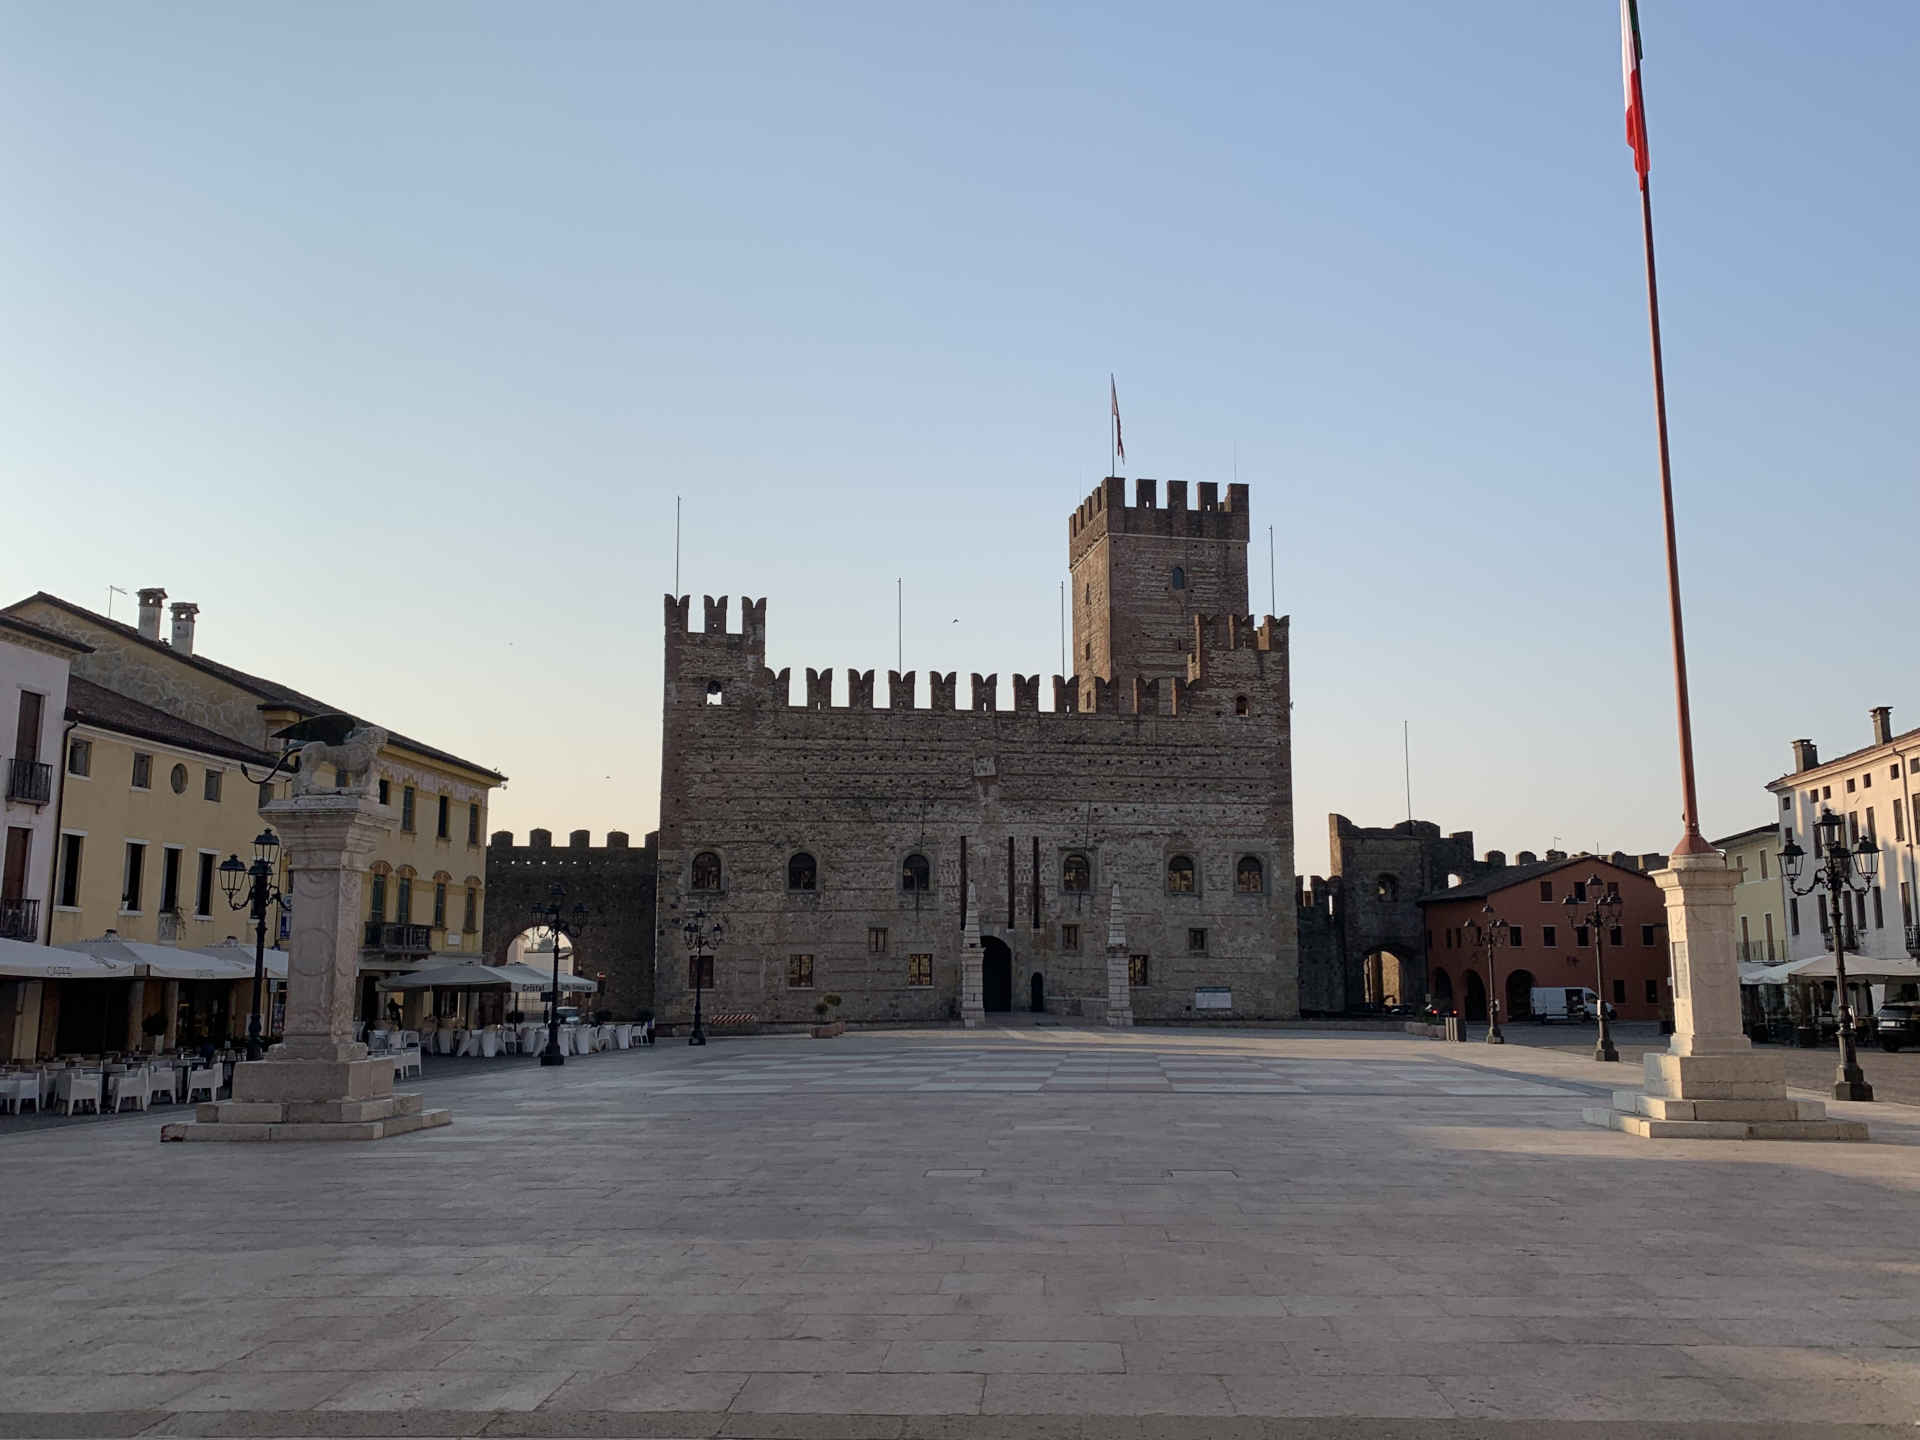 Photos of Marostica, Chess Square and Lower Castle